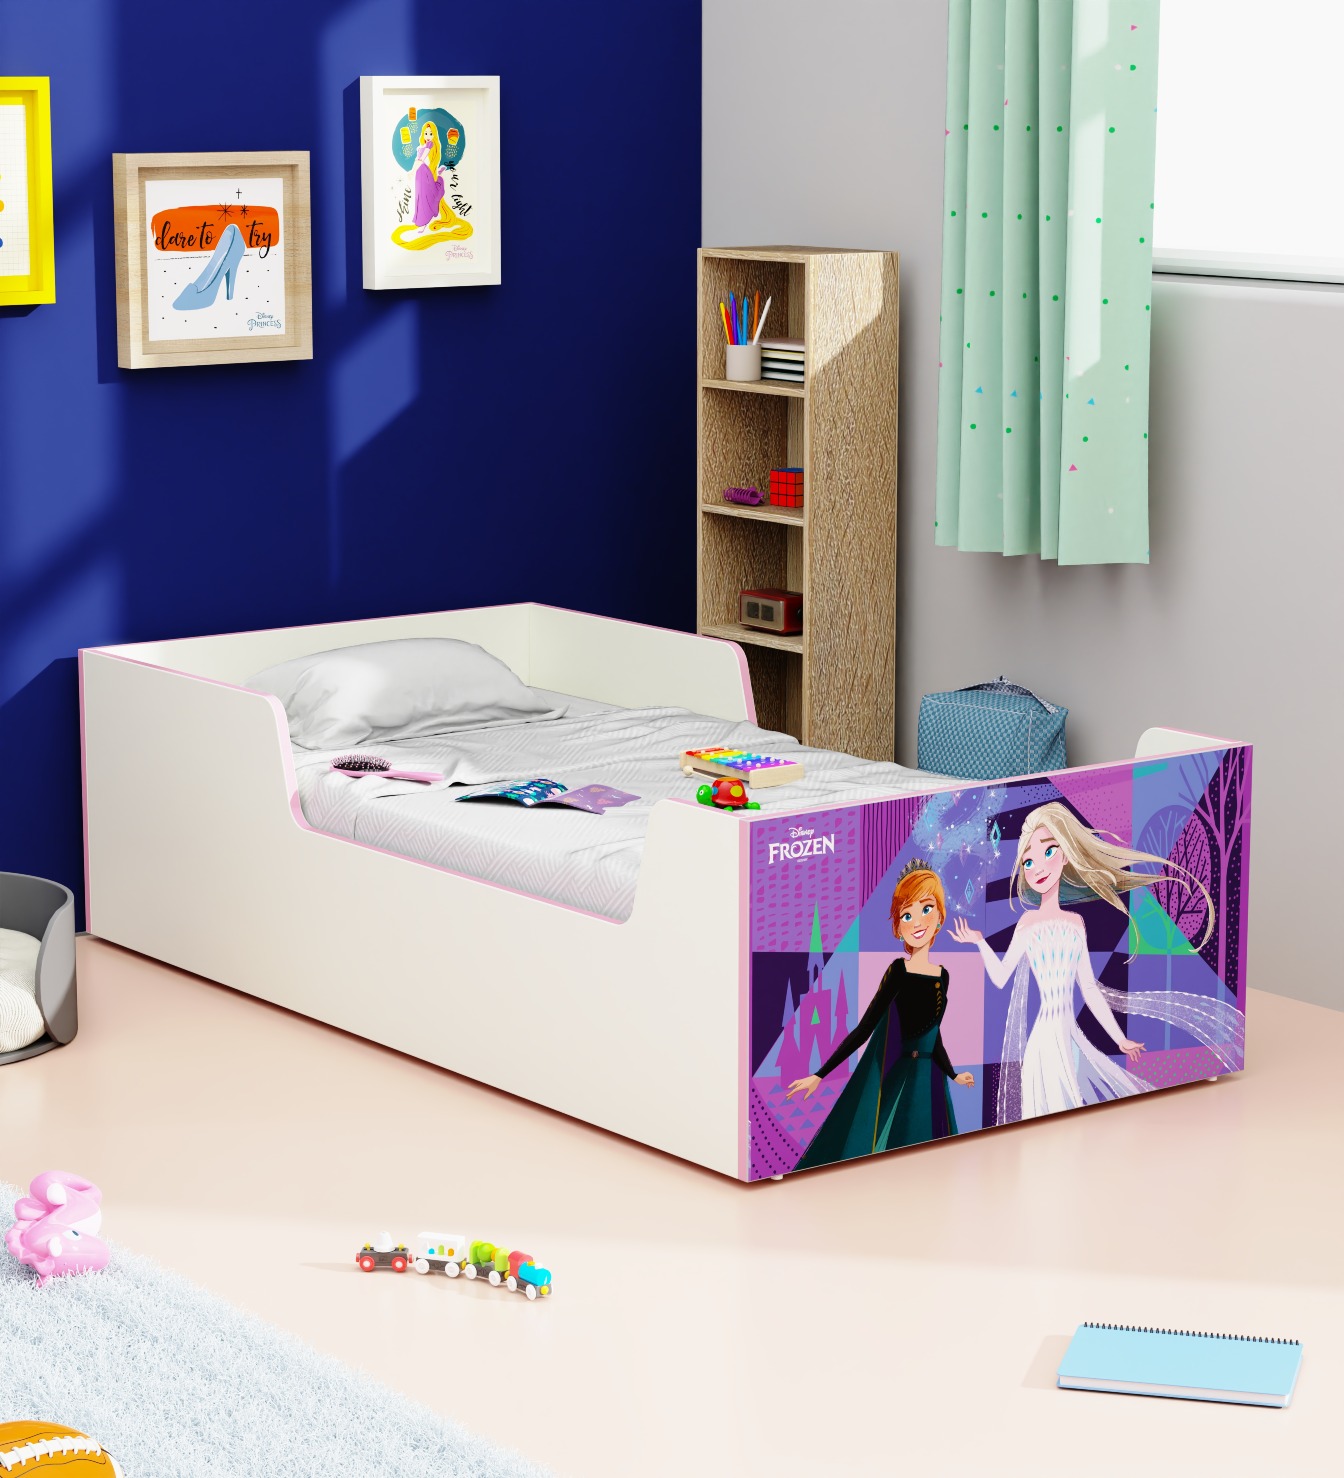 Boingg Dreampod Frozen Engineered Wood Single Bed for Kids in Purple & White Colour with Box Storage